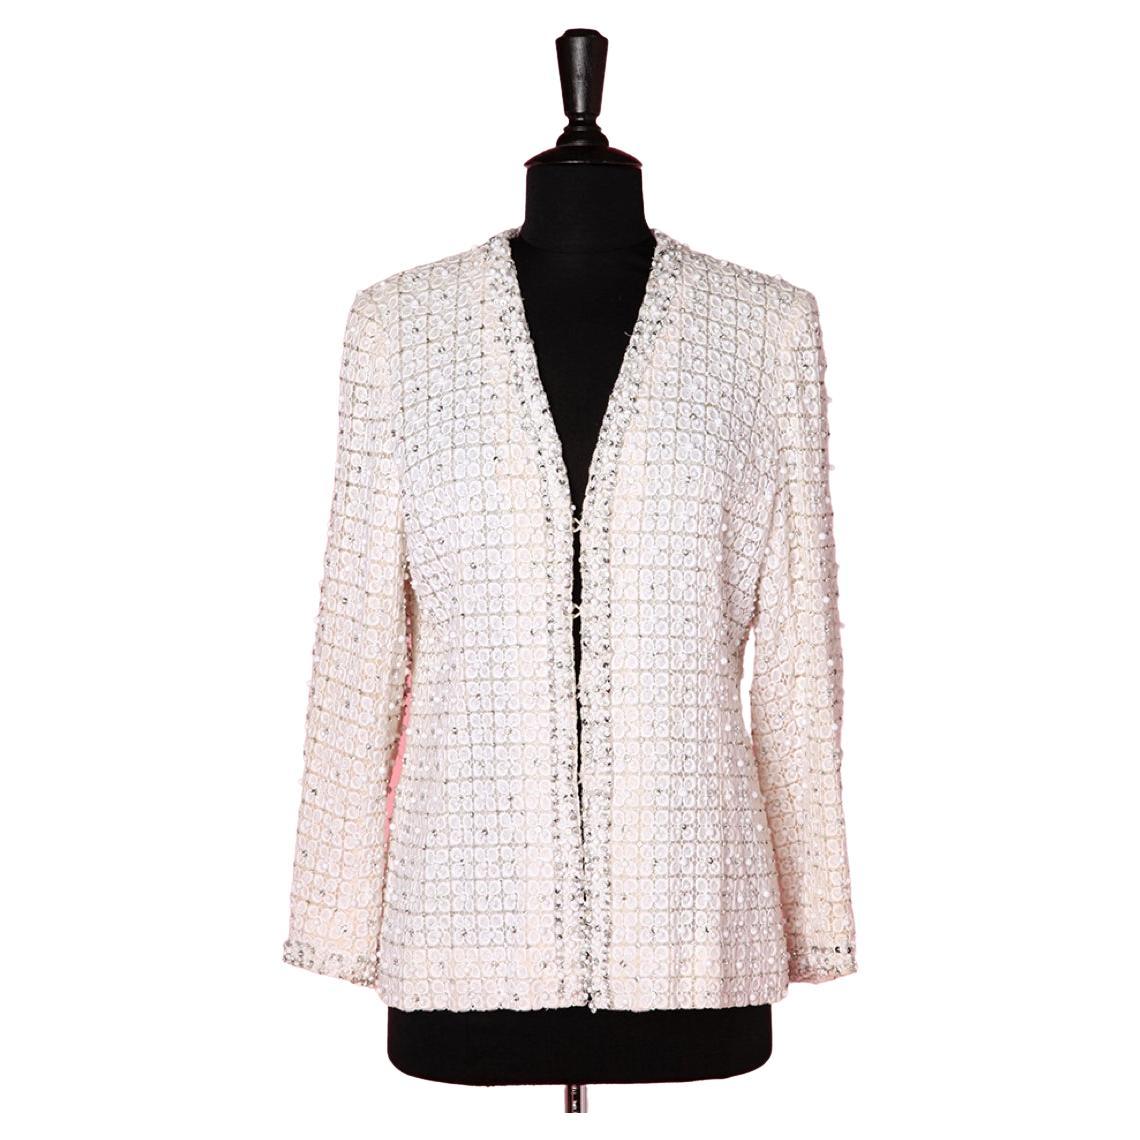 1960's white lace evening jacket with rhinestone and beads embroideries  For Sale